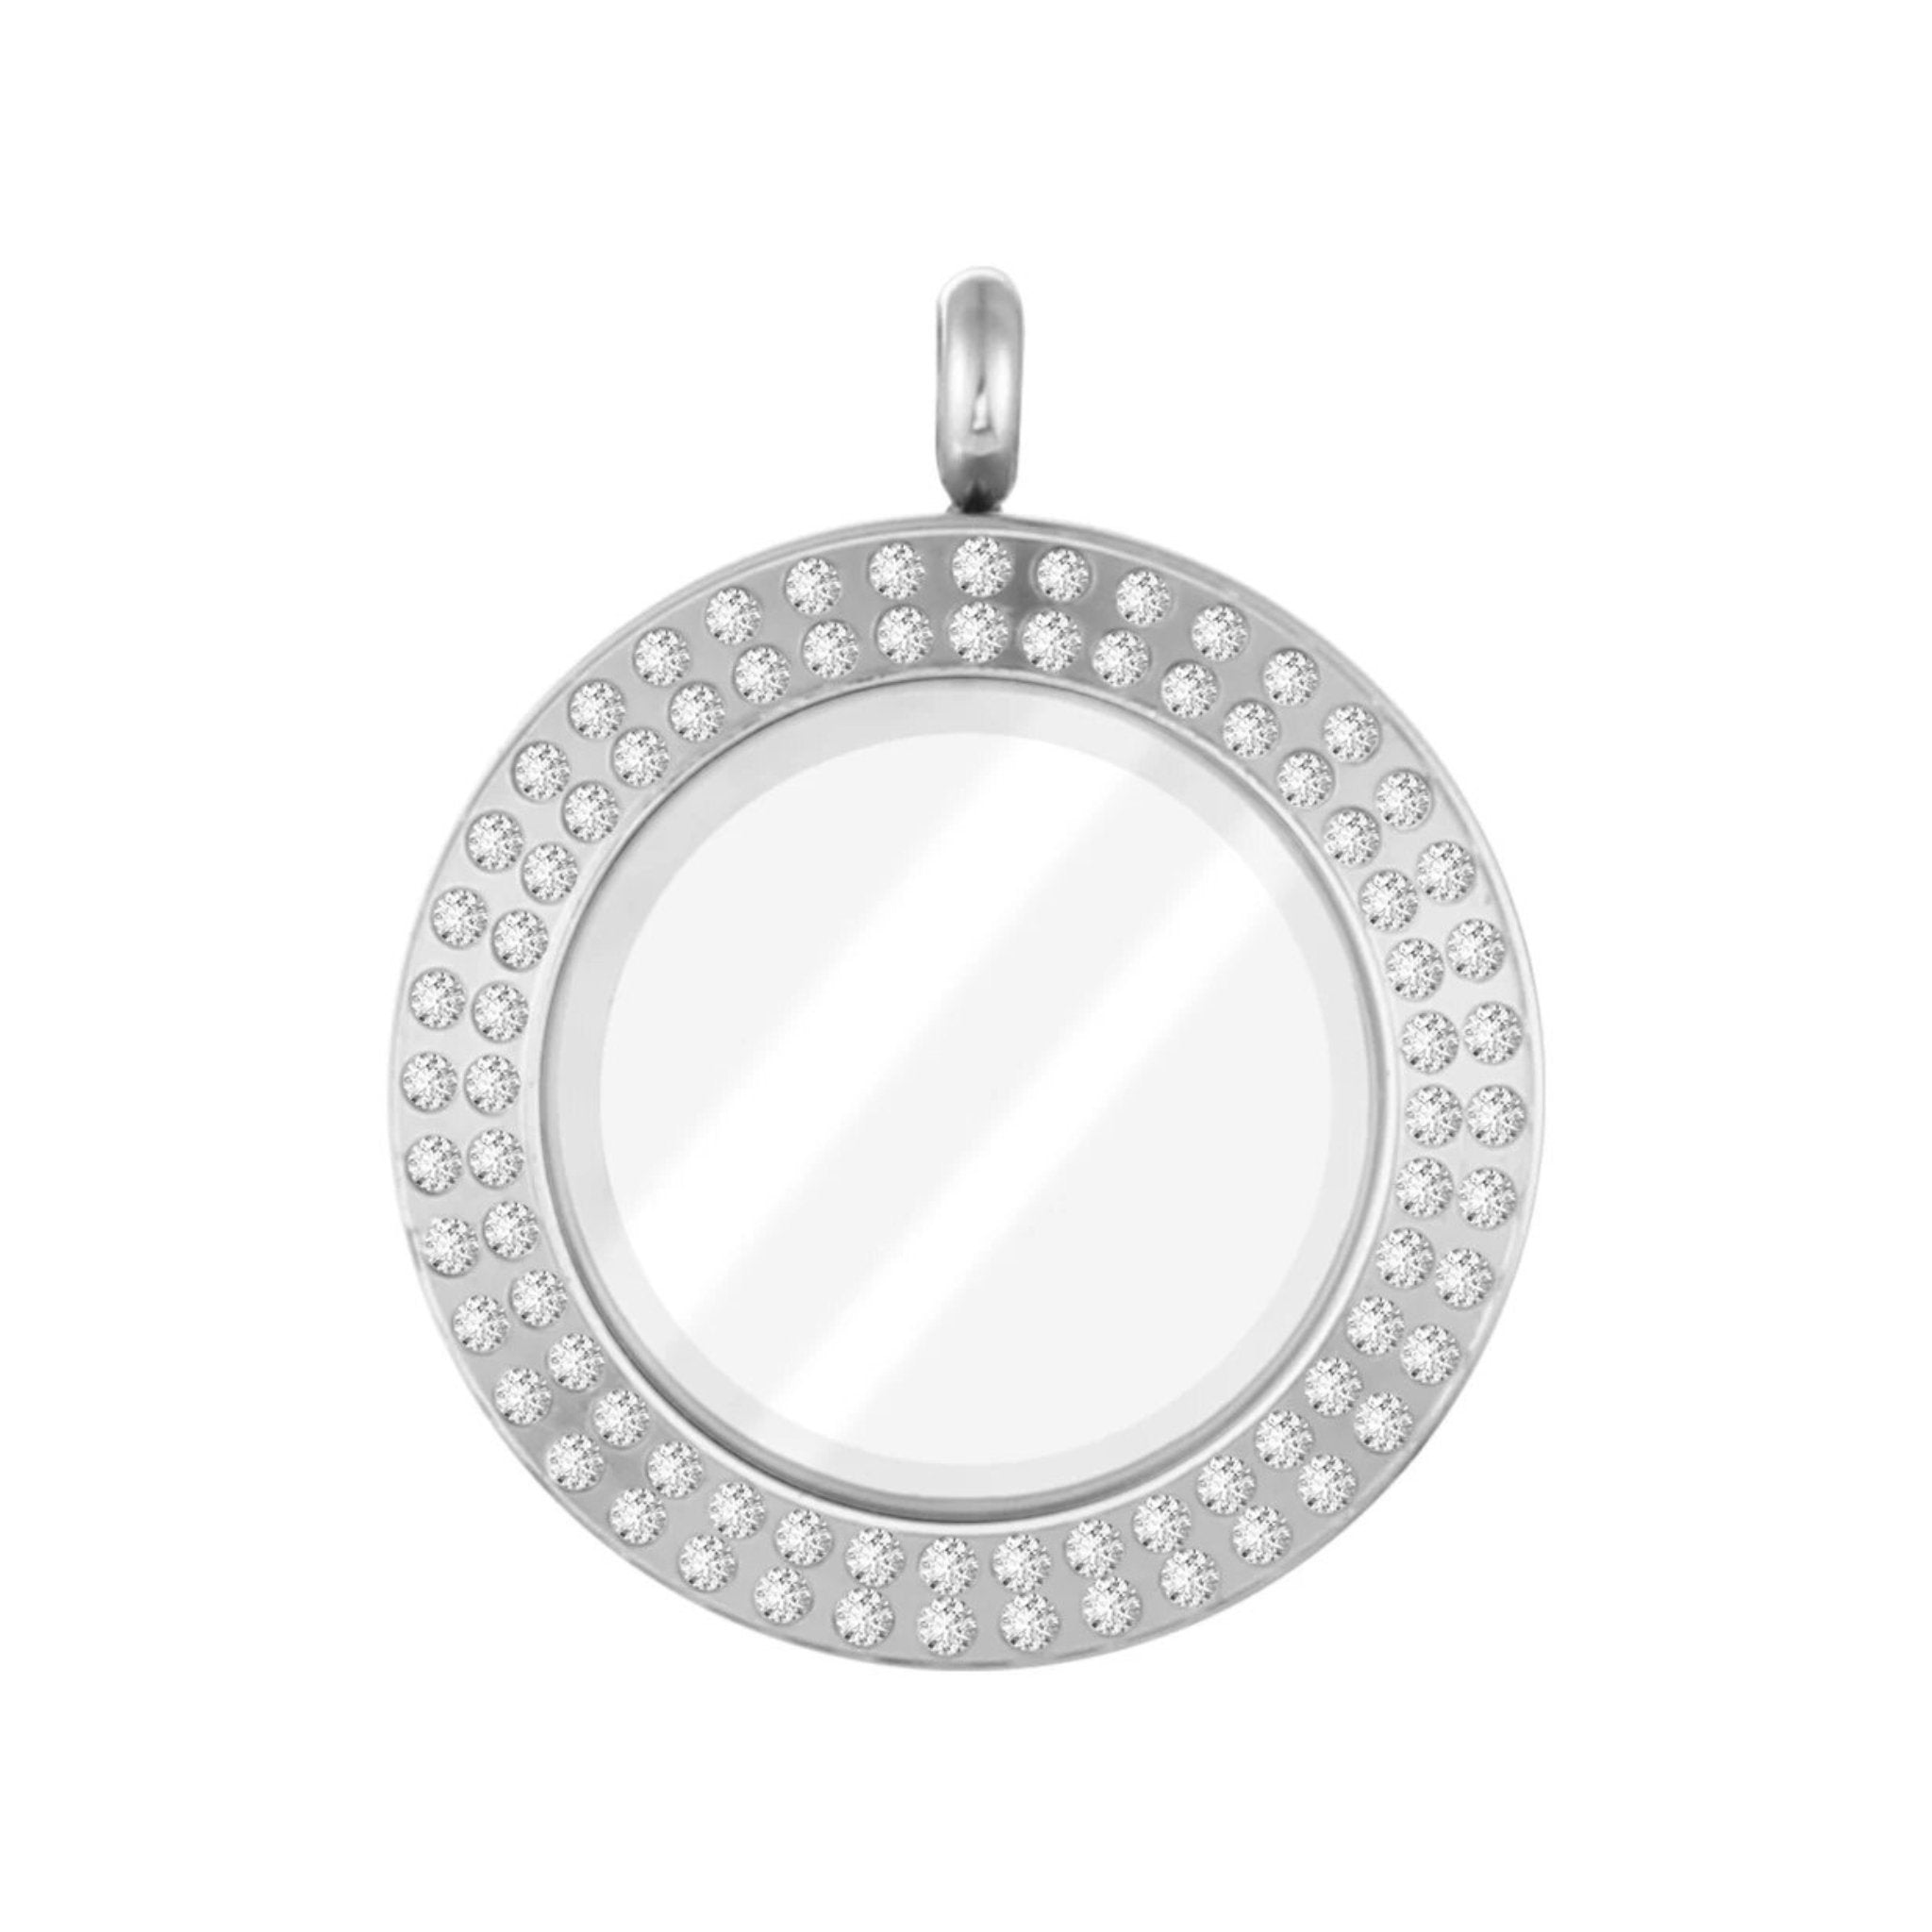 NEW! Limited Edition Memory Locket - Double Silver Crystal